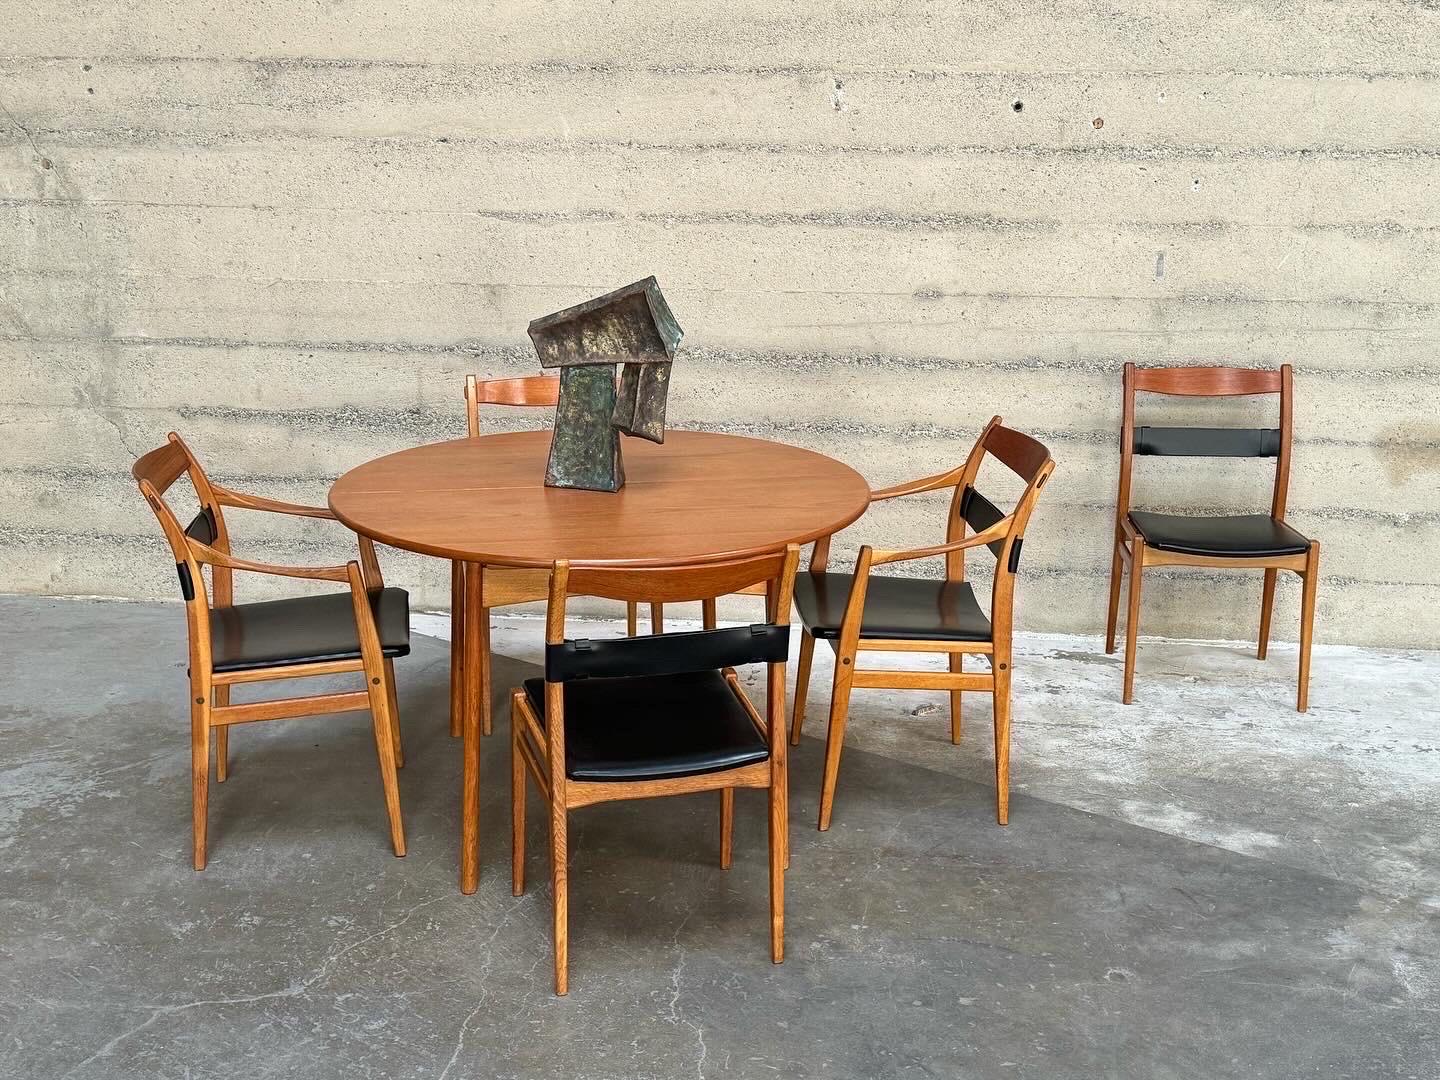 Dining set designed by Yngve Ekstrom for Dux of Sweden late 1950s early 1960s. The set is constructed of teak and oak, the dining chairs are of oak, leather, vinyl with brass hardware fasteners  and the dining table has a teak top with oak legs with